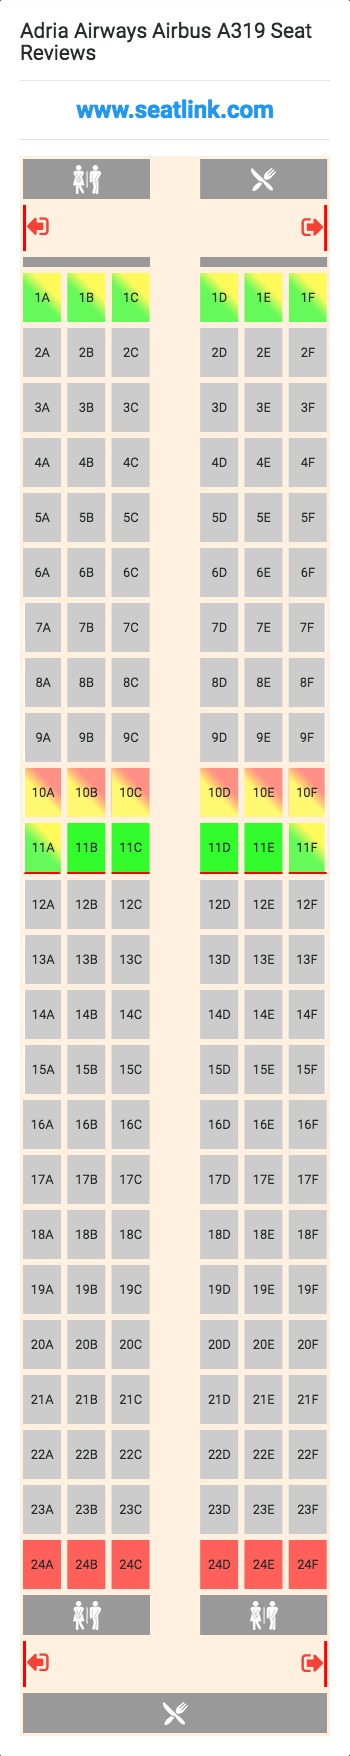 Delta Airlines Airbus A319 Seating Chart